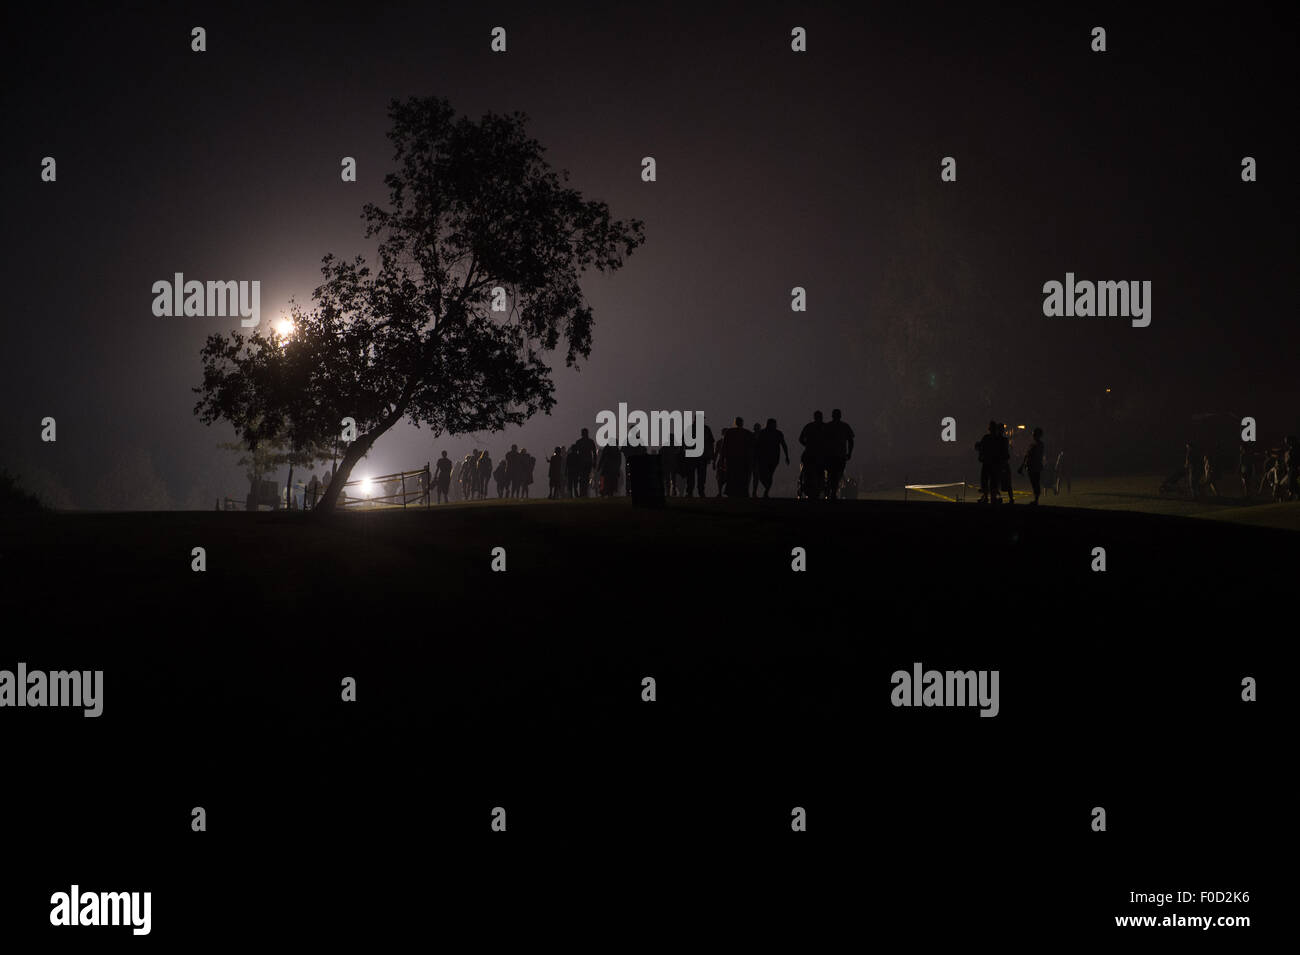 Crowd of people silhouetted walking along pathway at night Stock Photo